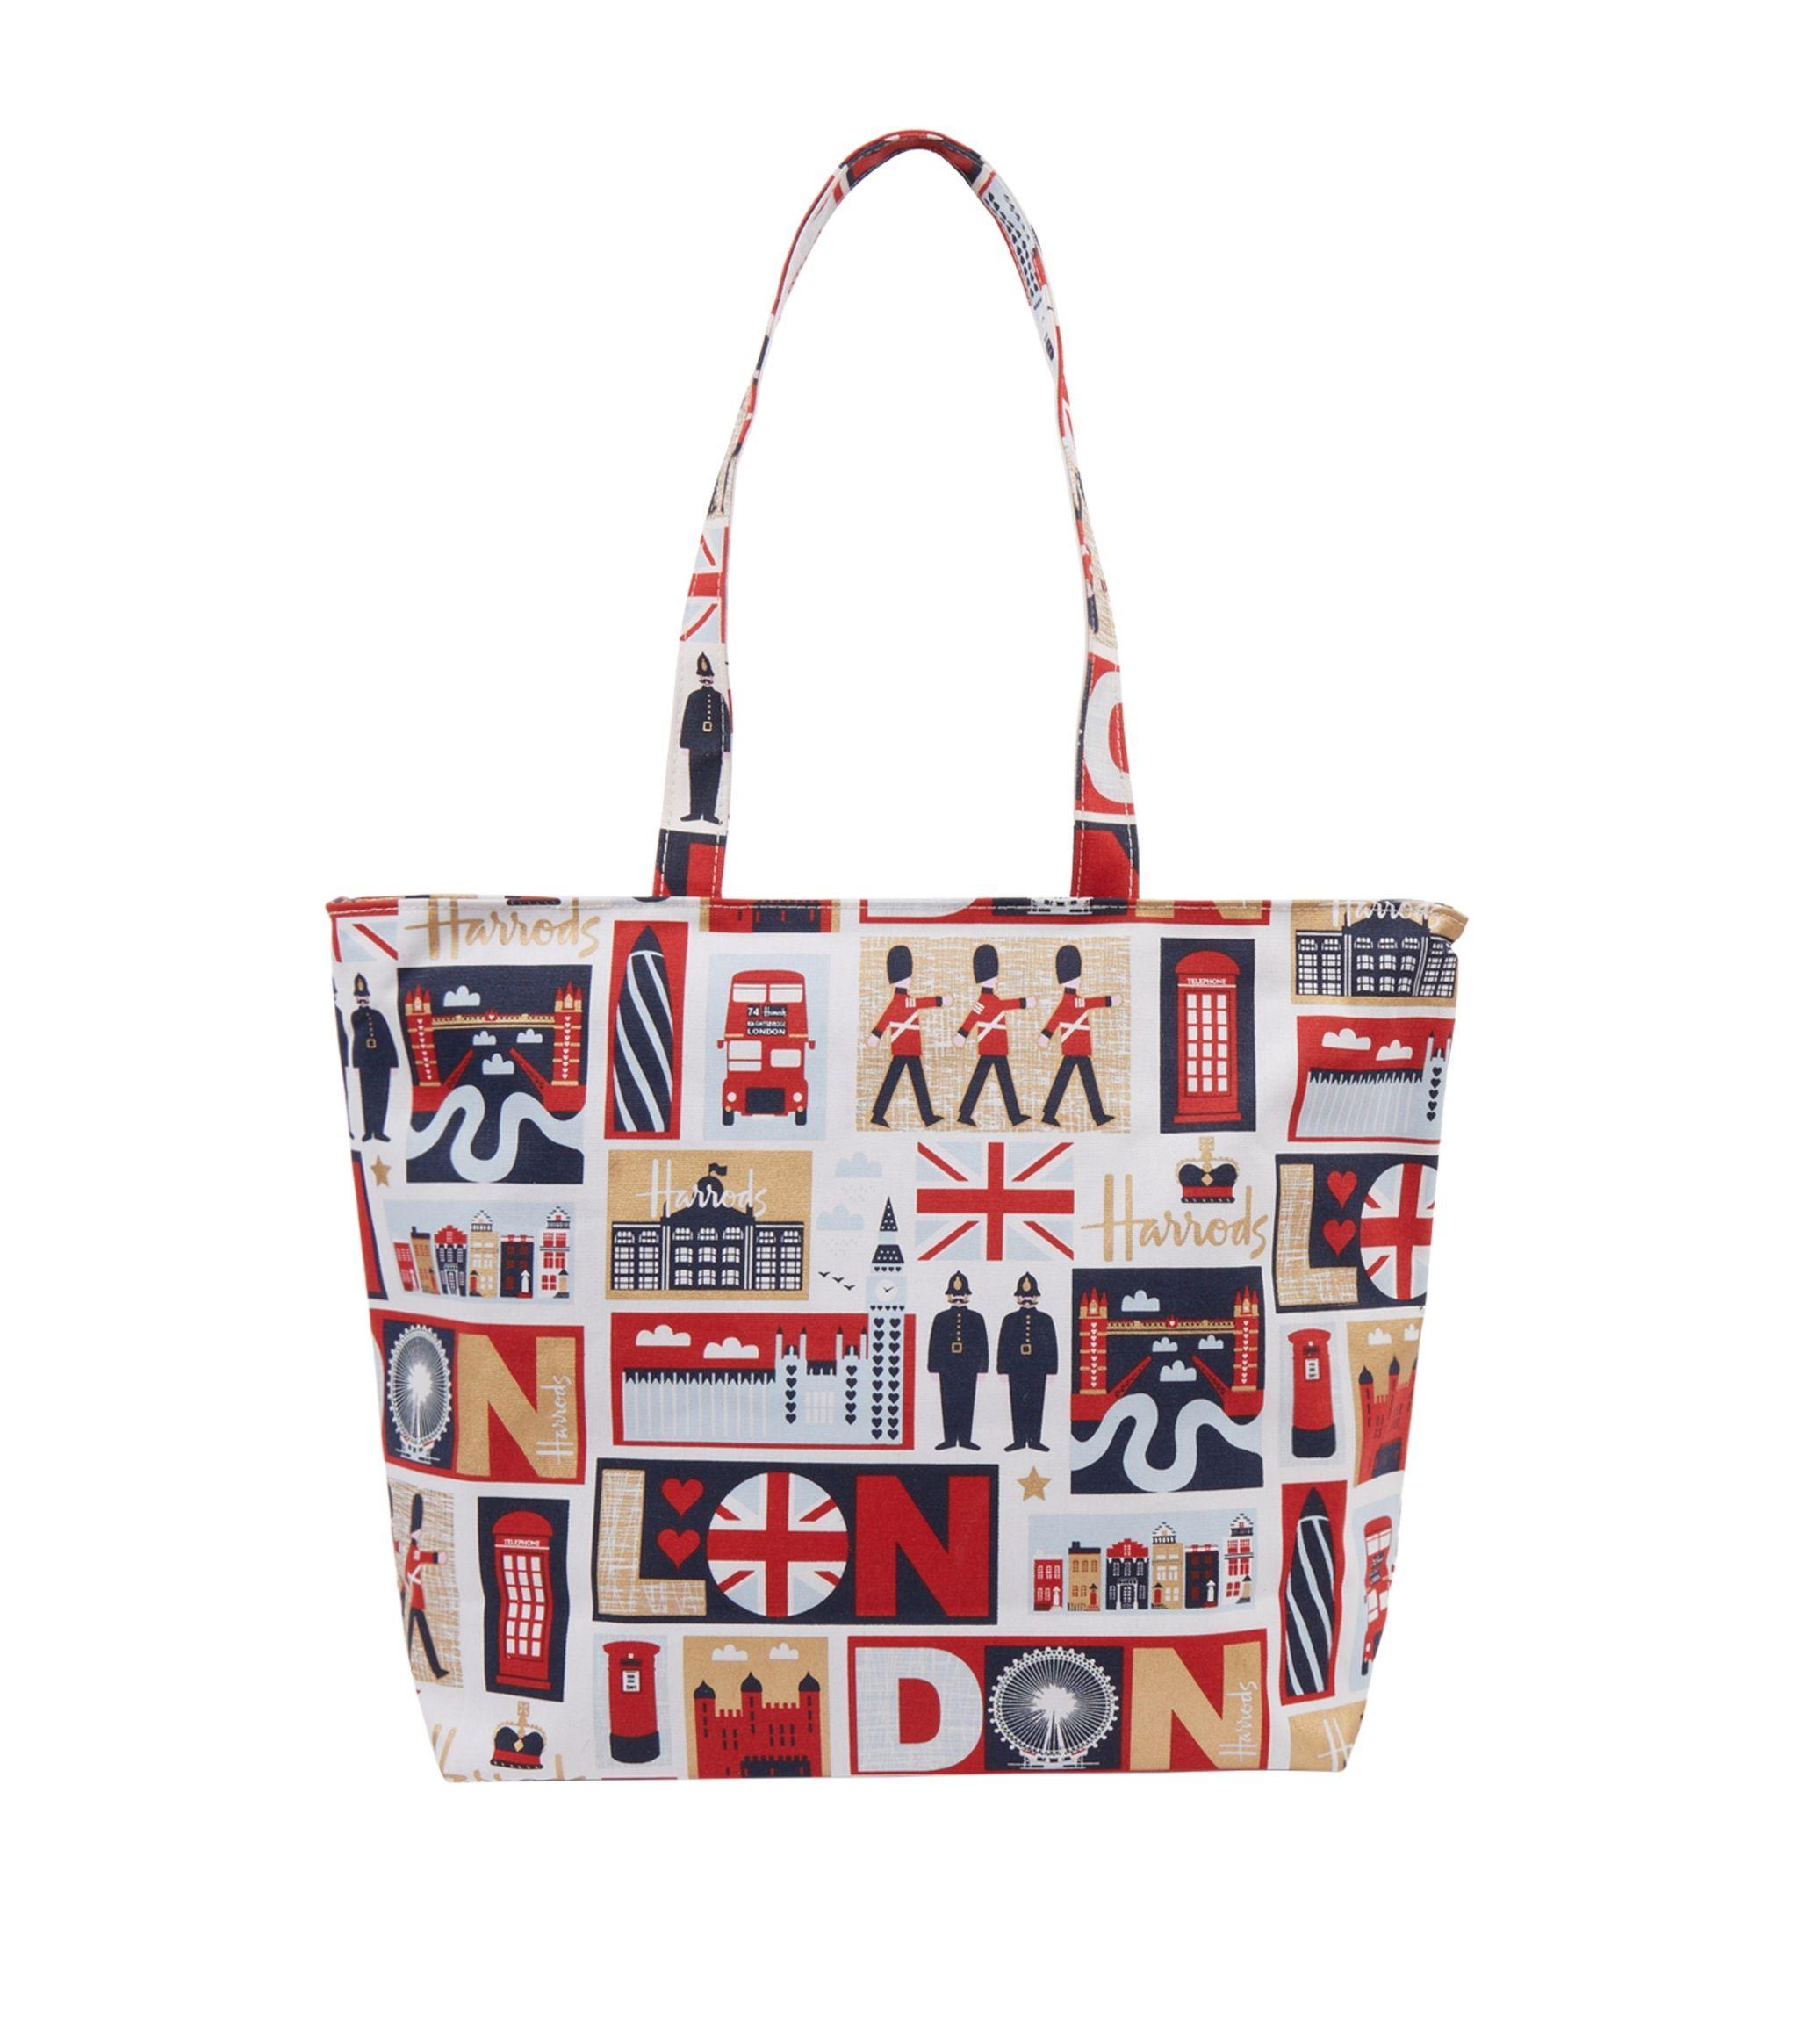 Harrods Cotton Iconic London Shoulder Bag in Red - Lyst